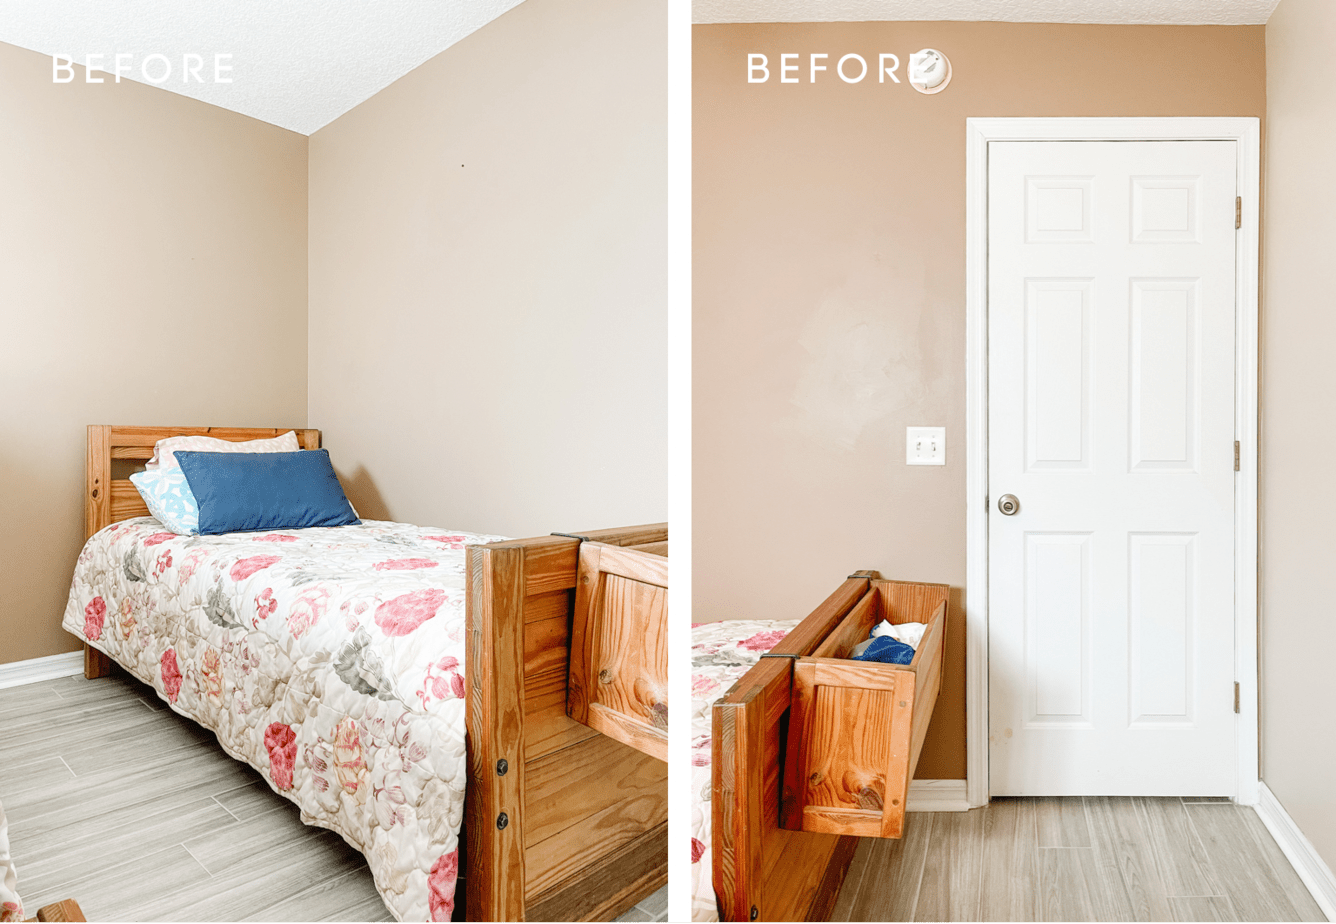 Introducing the Kids Bedroom Makeover in a Rental